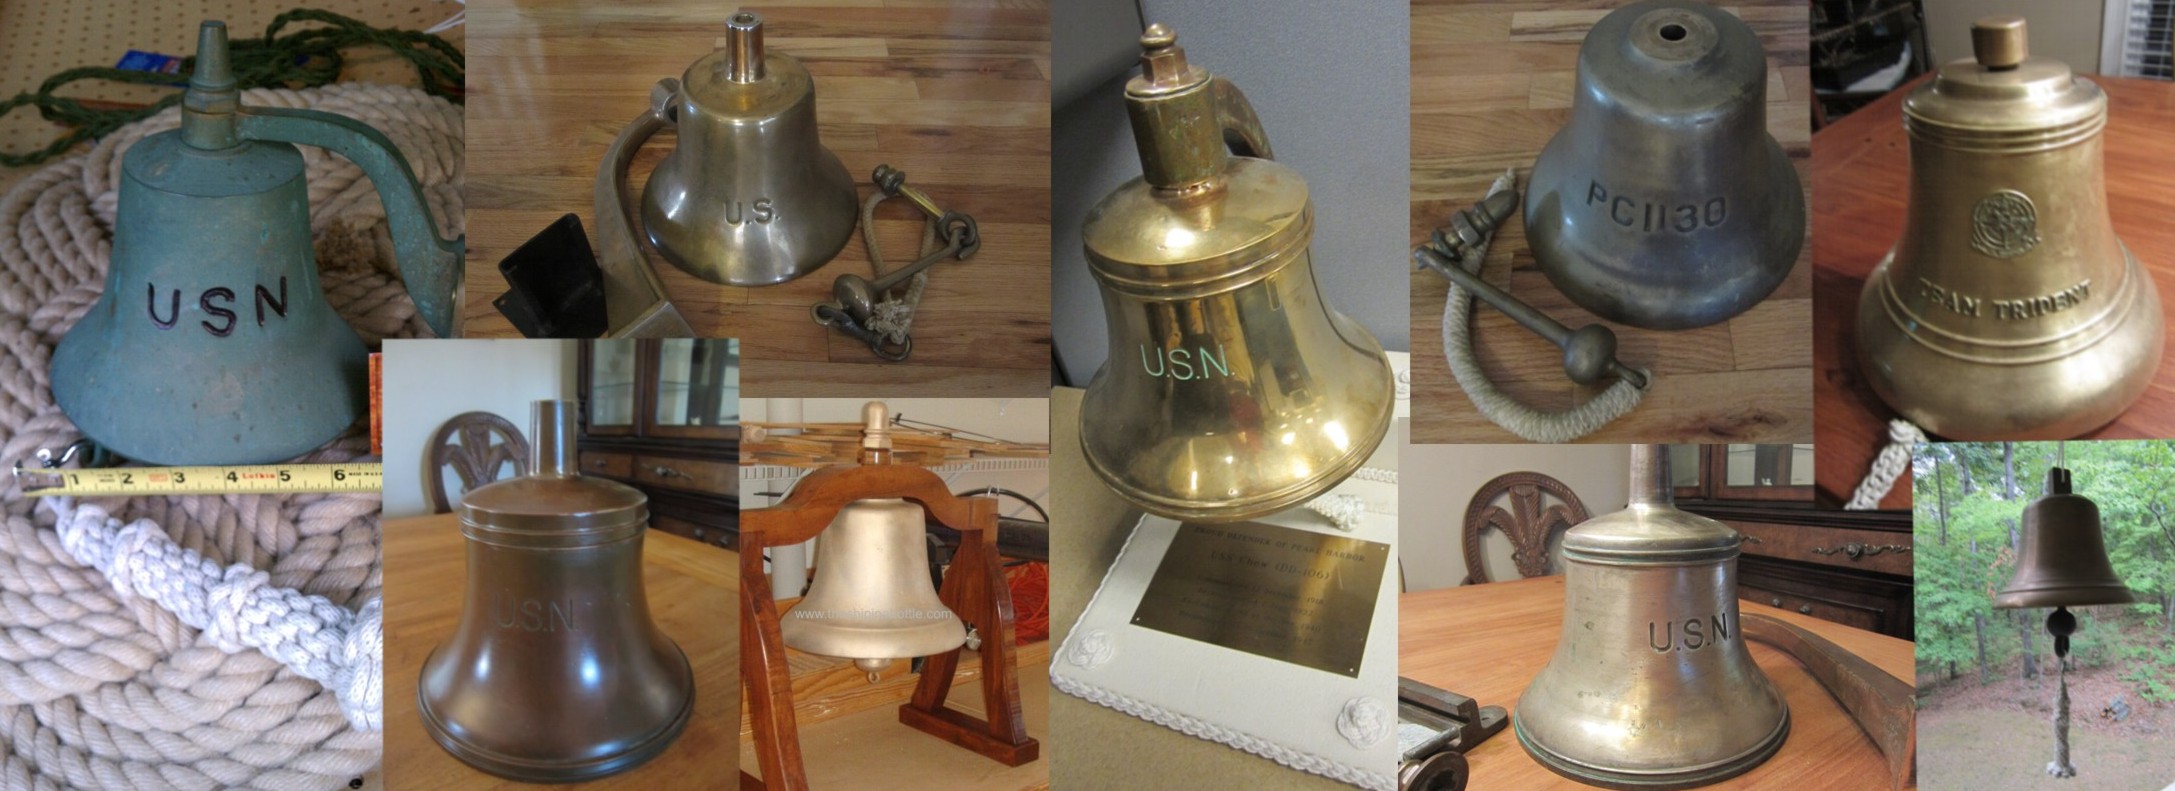 USN United States Navy Brass Nickel Plated Nautical Naval Ship Bell U.S.N.  Boat 